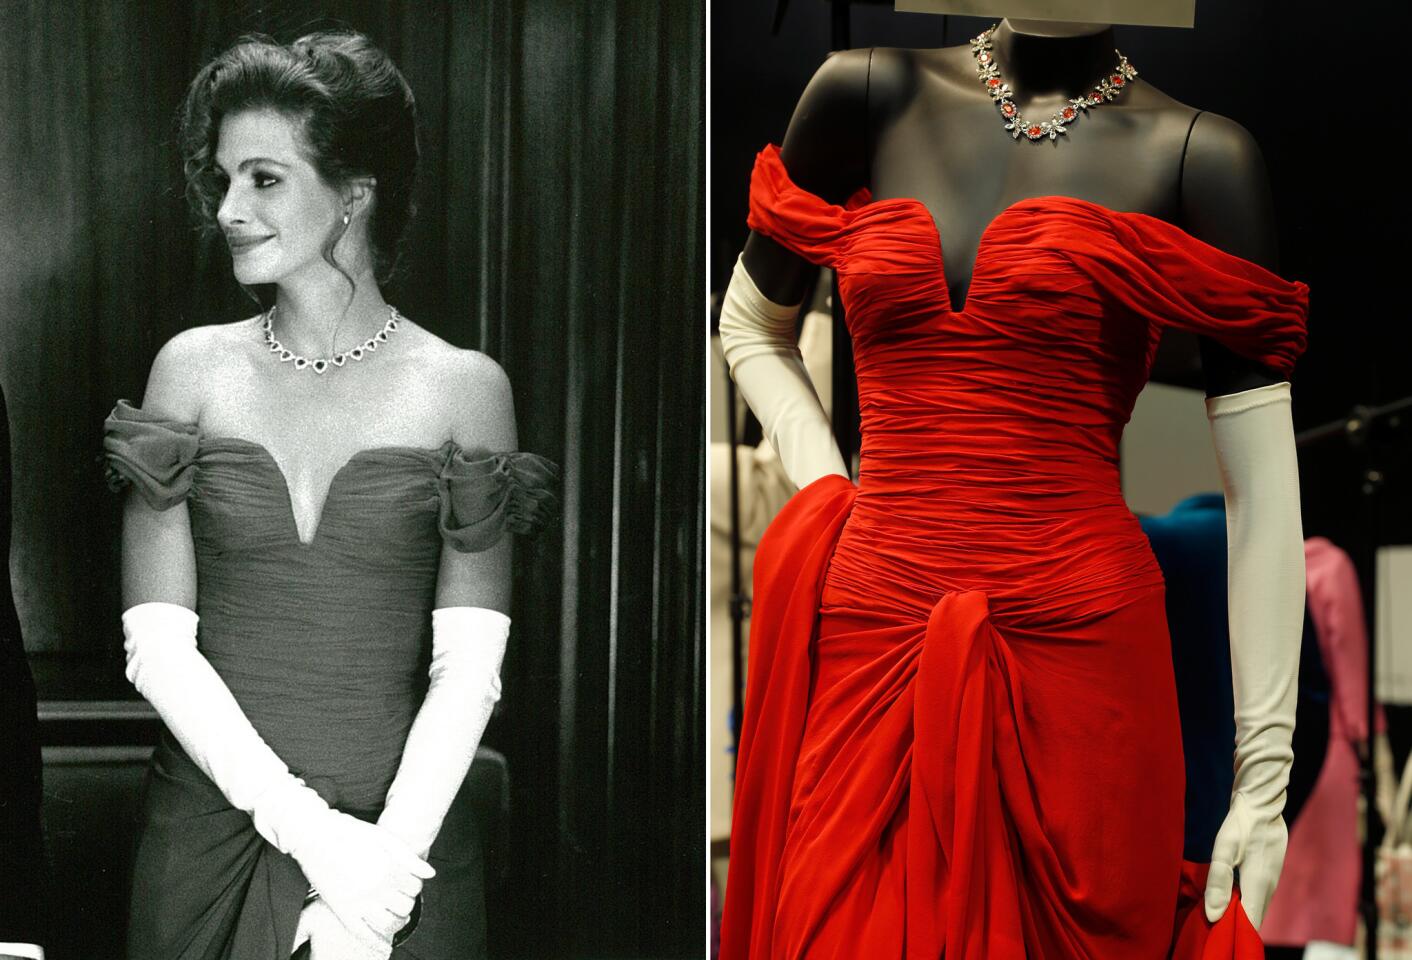 On the left, Julia Roberts stars as Vivian Ward in the romantic comedy "Pretty Woman." On the right, Roberts' red dress, silver necklace and white gloves are on display.